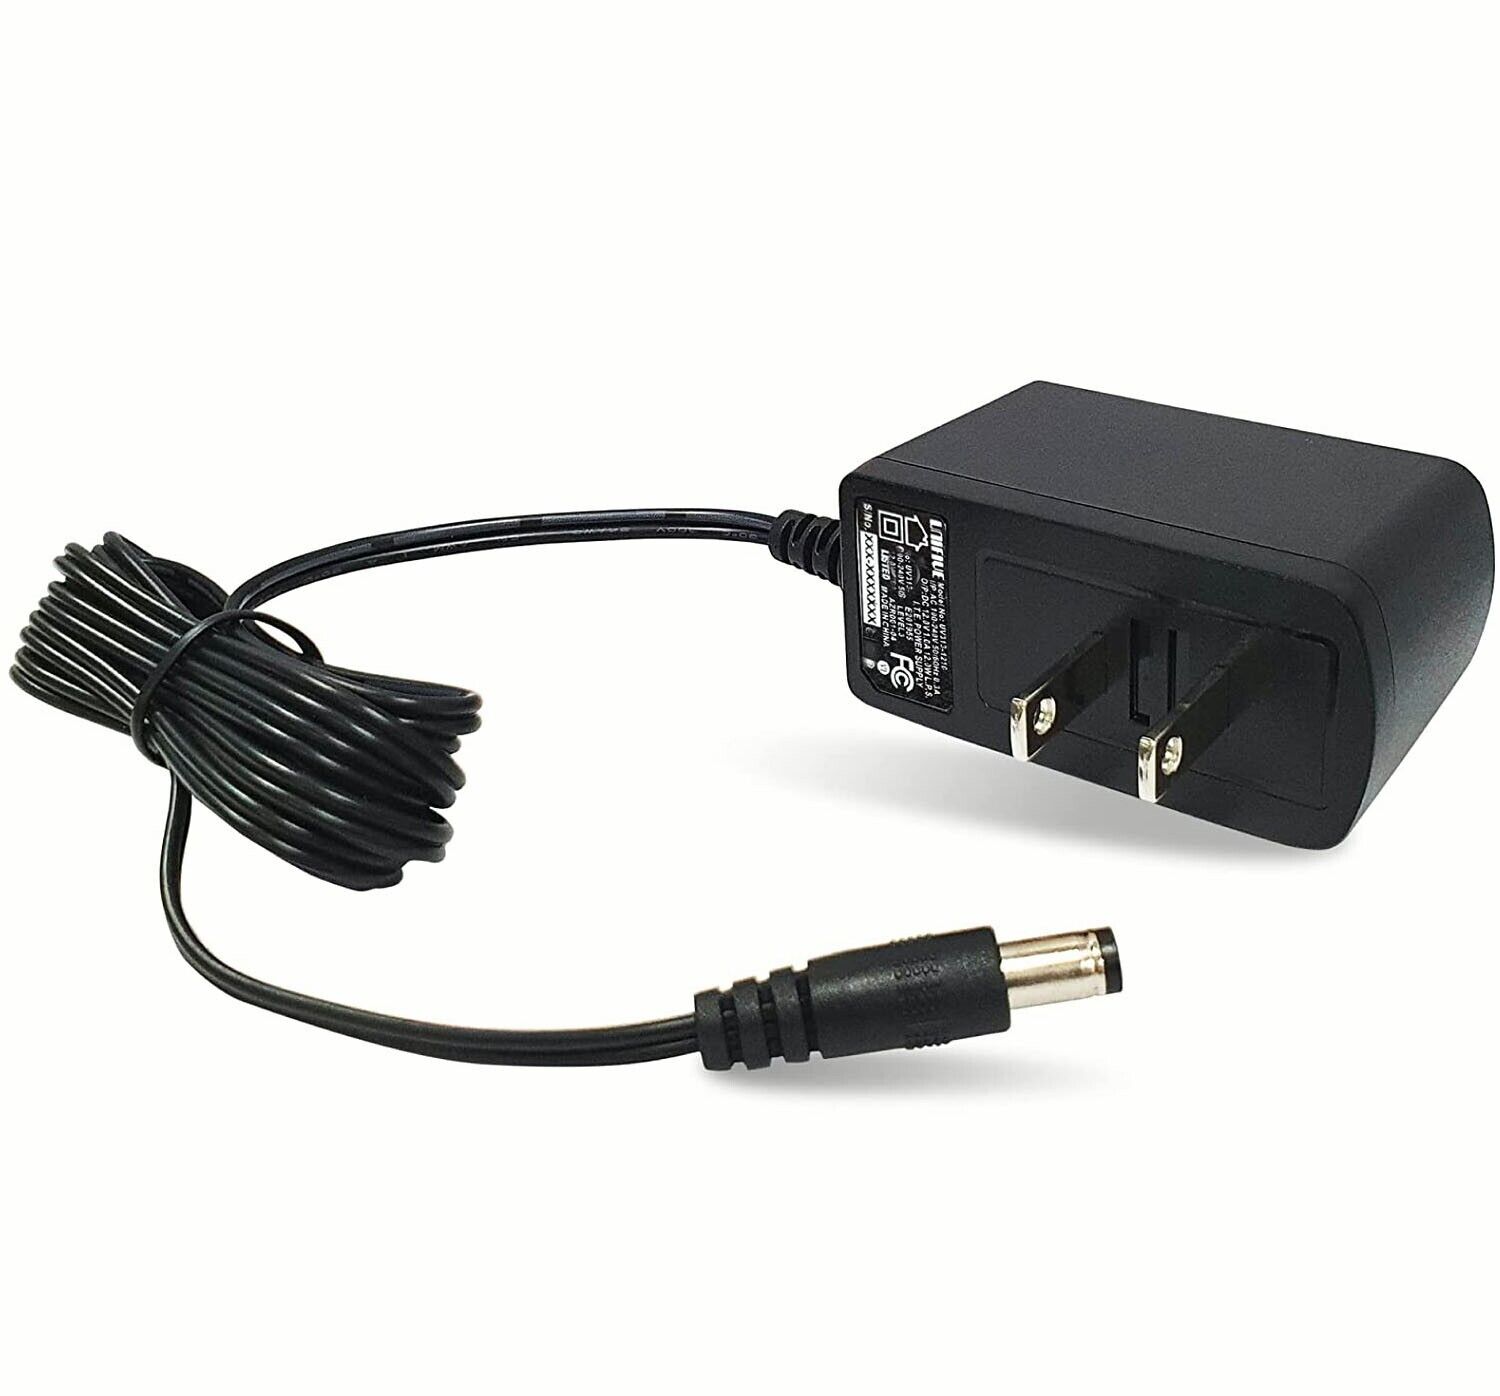 NEW Premium AC/DC Power Supply Adapter Charger Transformer 100% compatible with the various OTC scanners listed in the t - Click Image to Close